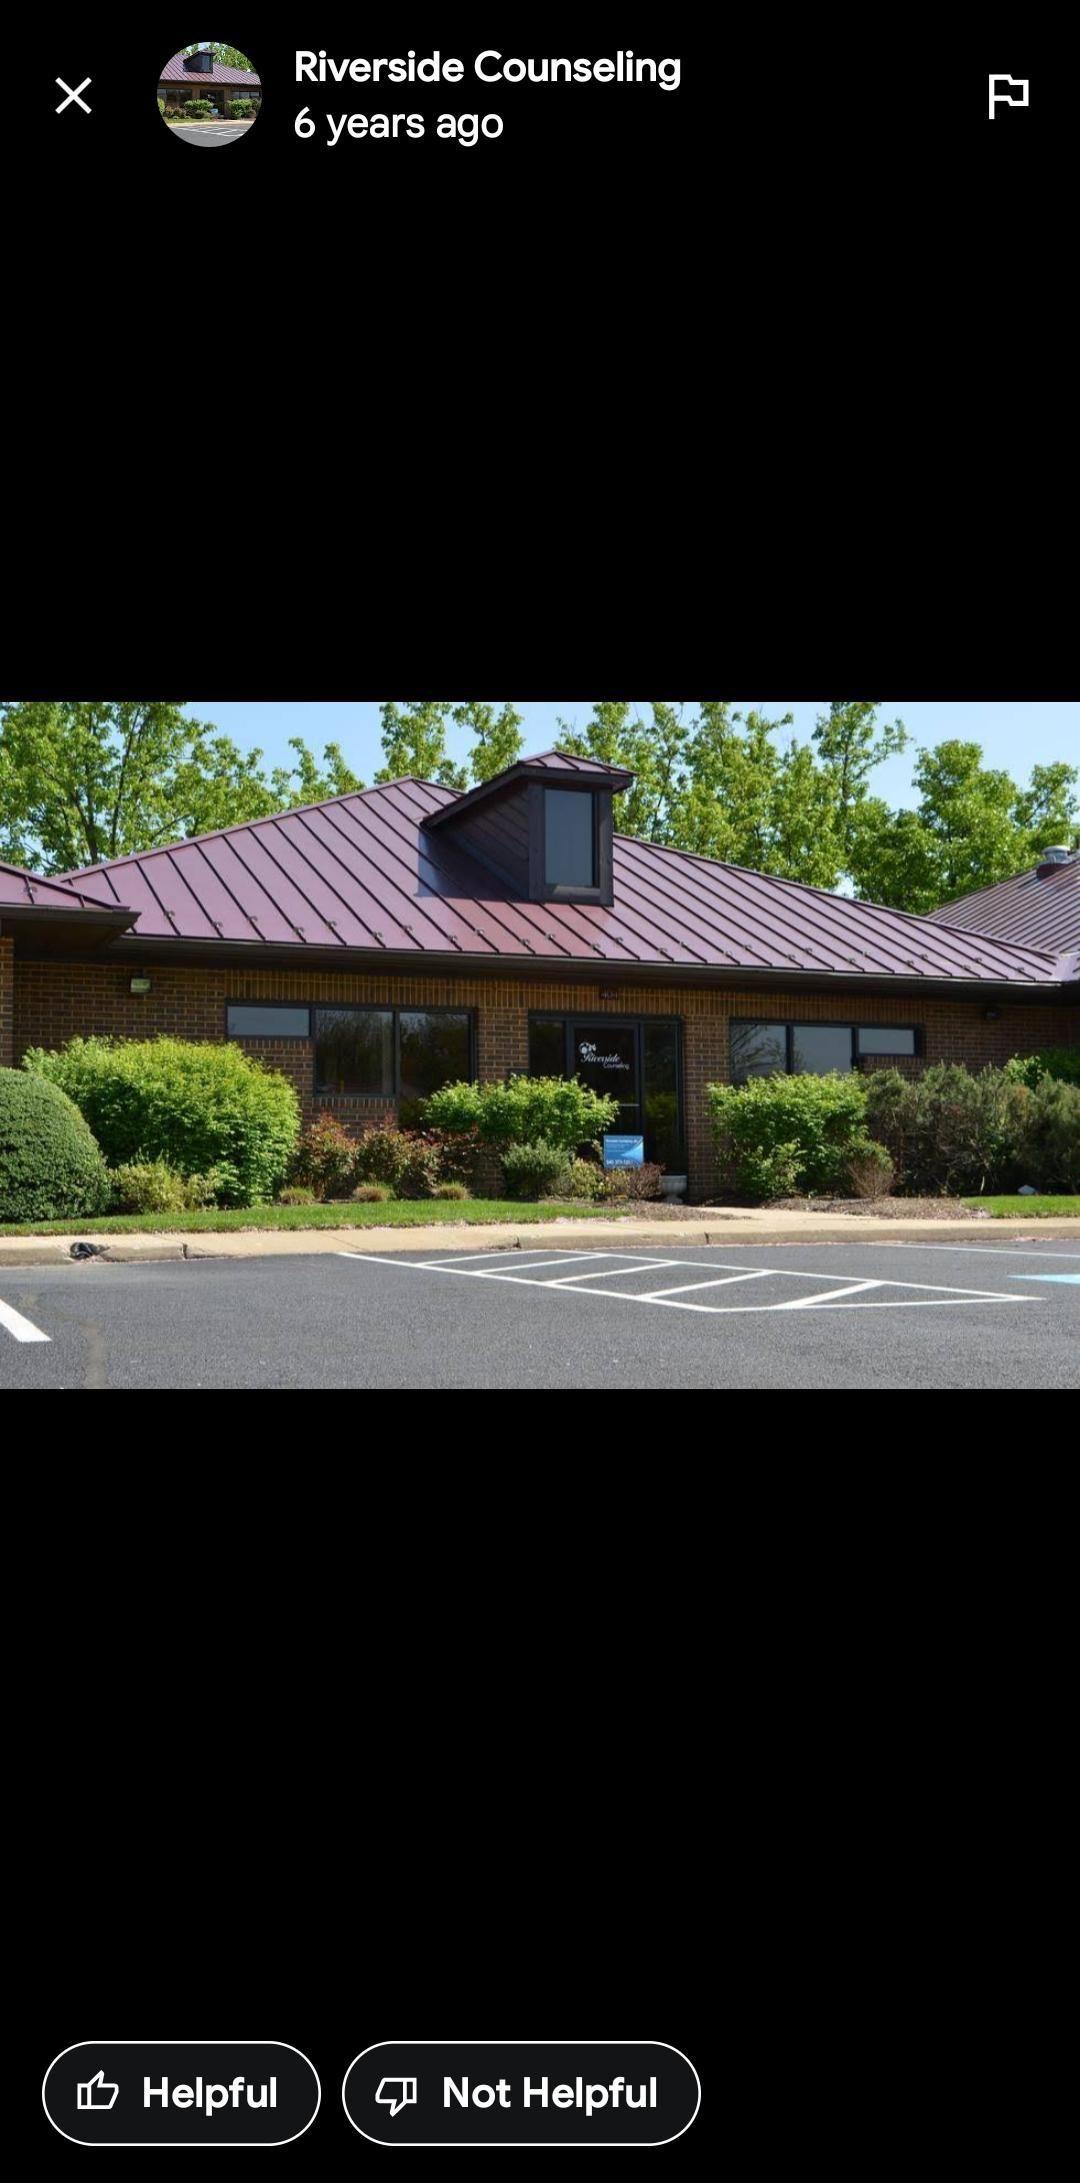 Gallery Photo of Riverside Counseling Fredericksburg- location. We counsel with individuals, couples, families. We here to serve our clients in their time of need.